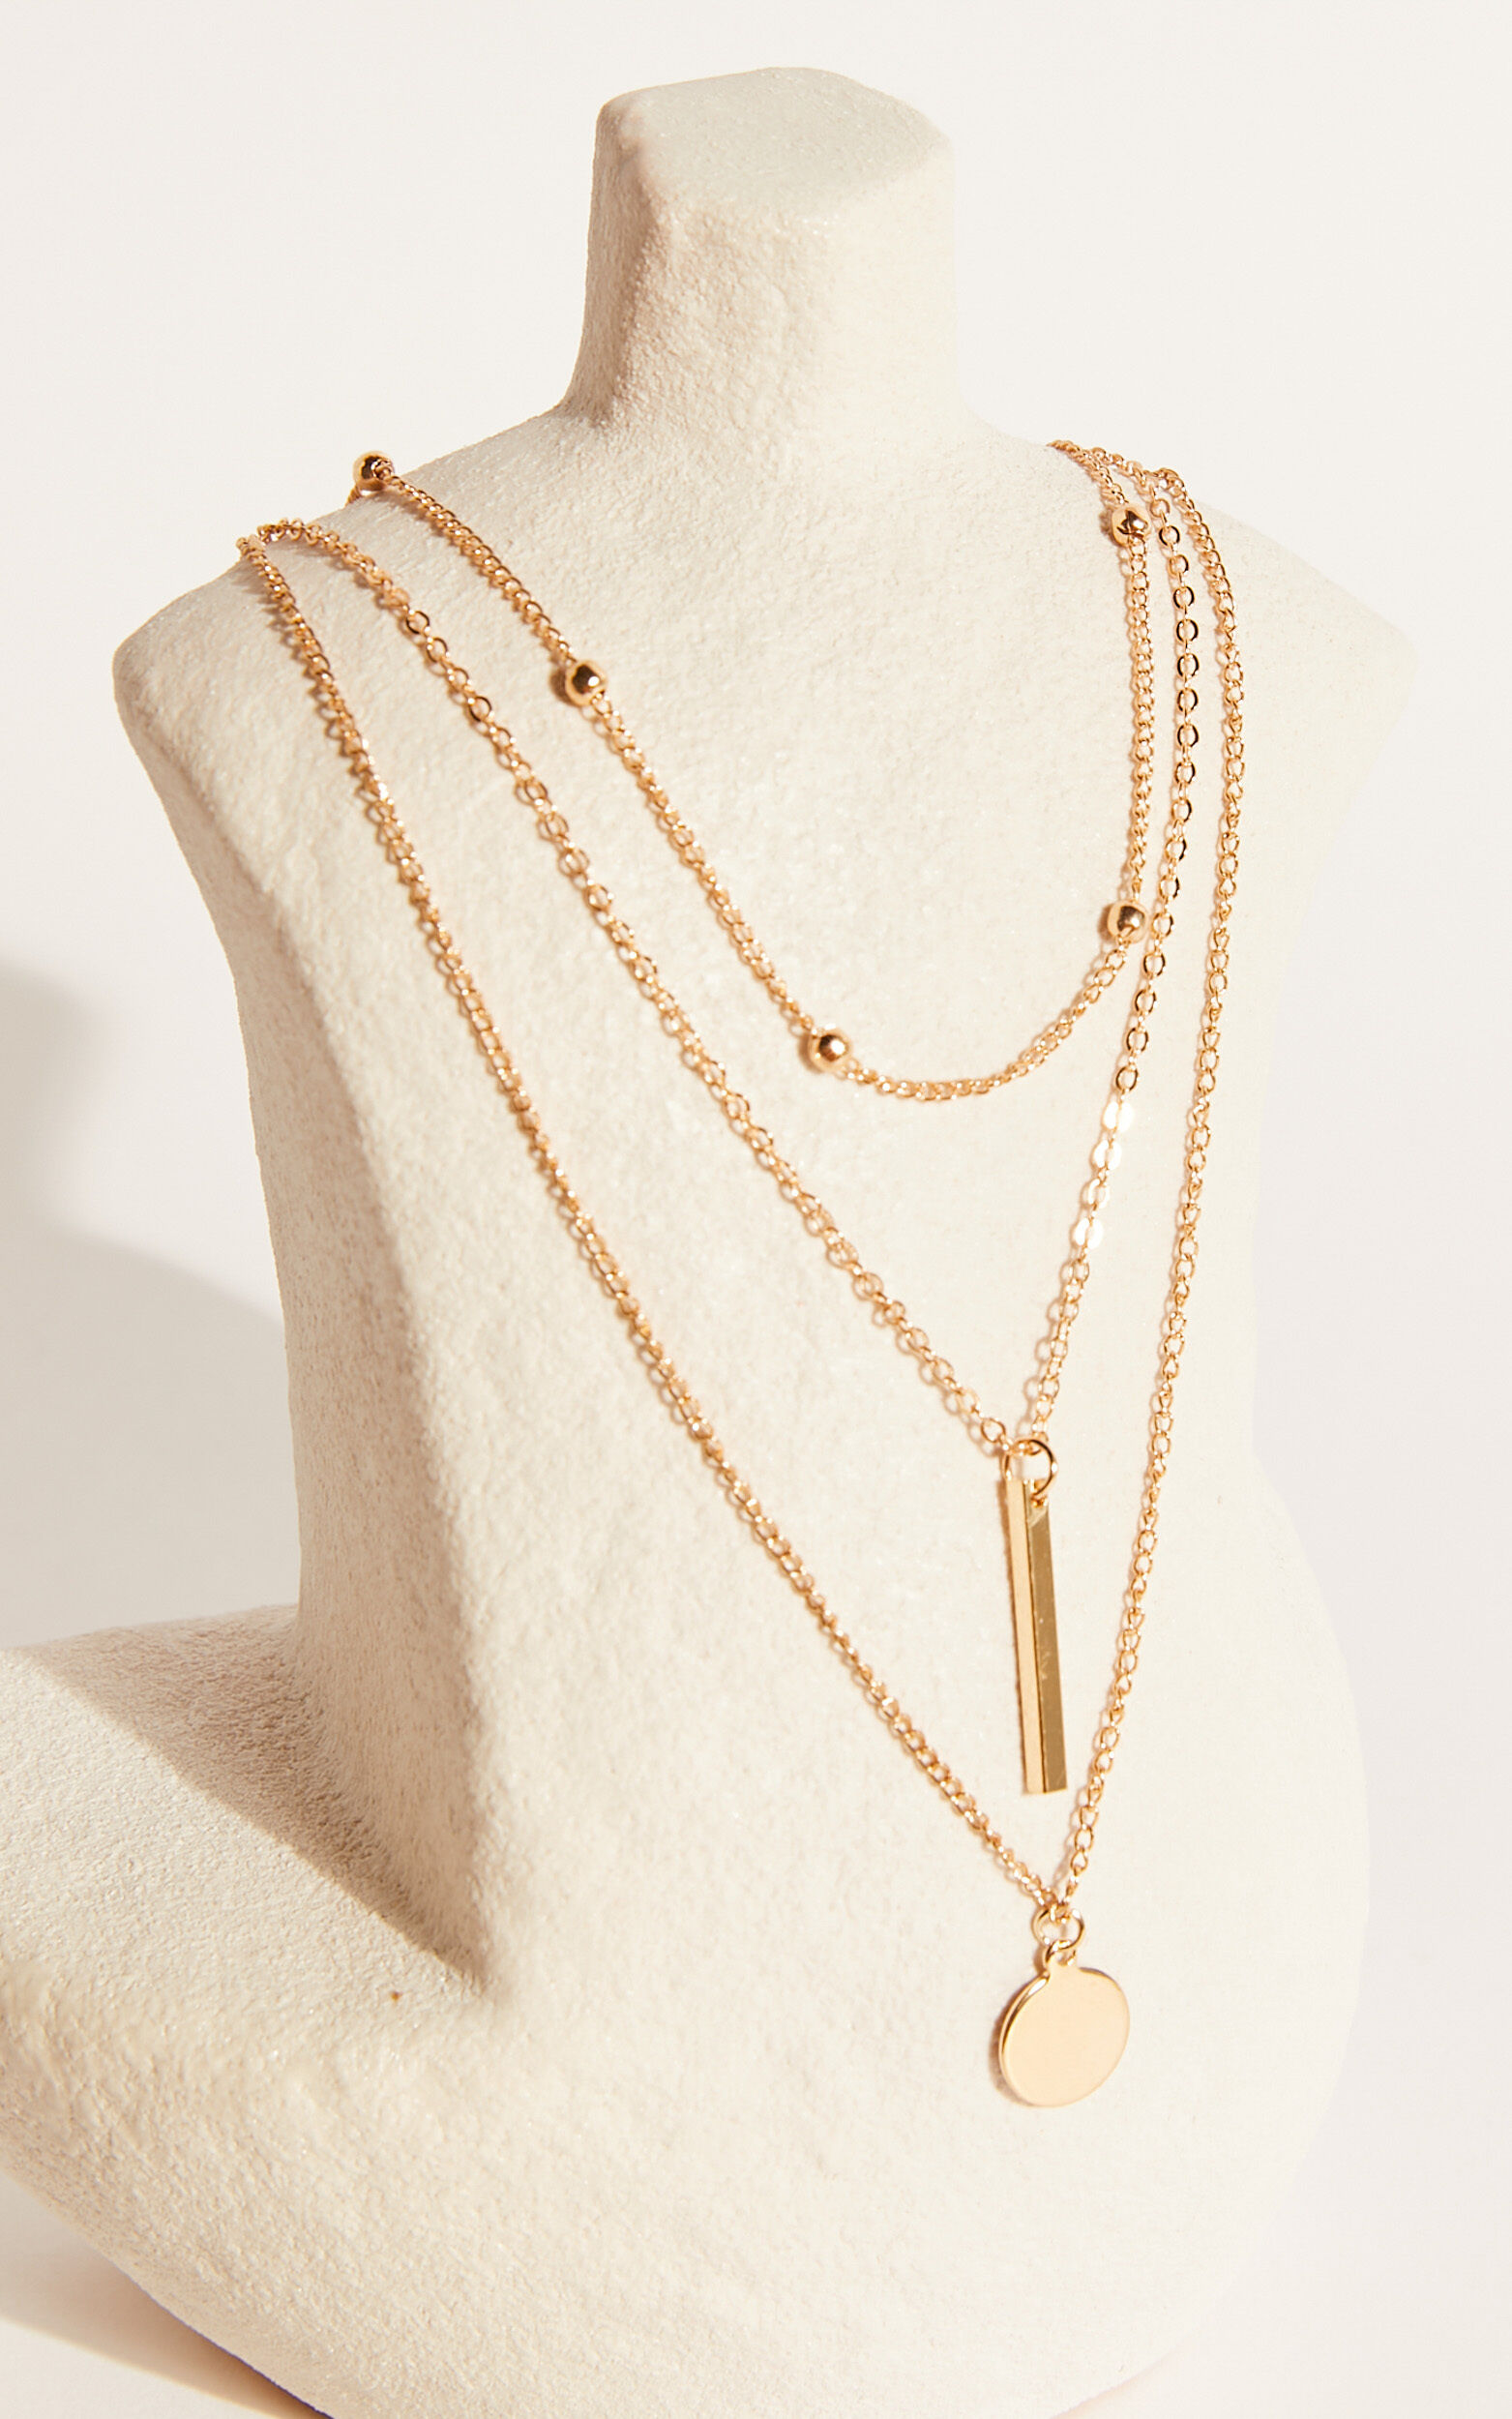 The Guest List necklace in Gold, GLD1